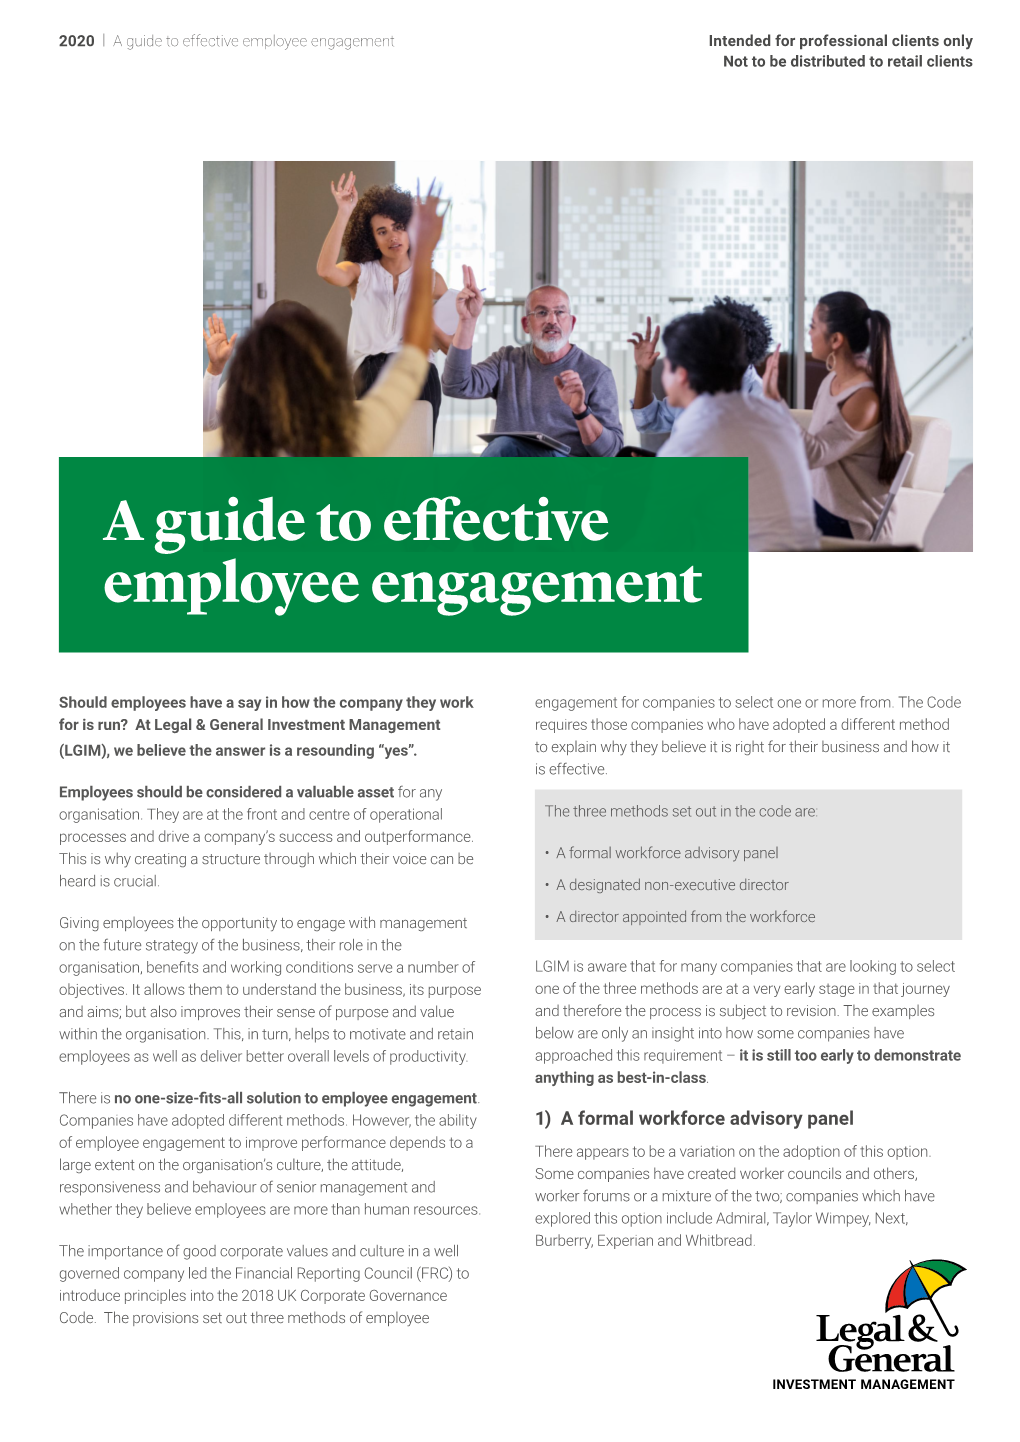 A Guide to Effective Employee Engagement Intended for Professional Clients Only Not to Be Distributed to Retail Clients